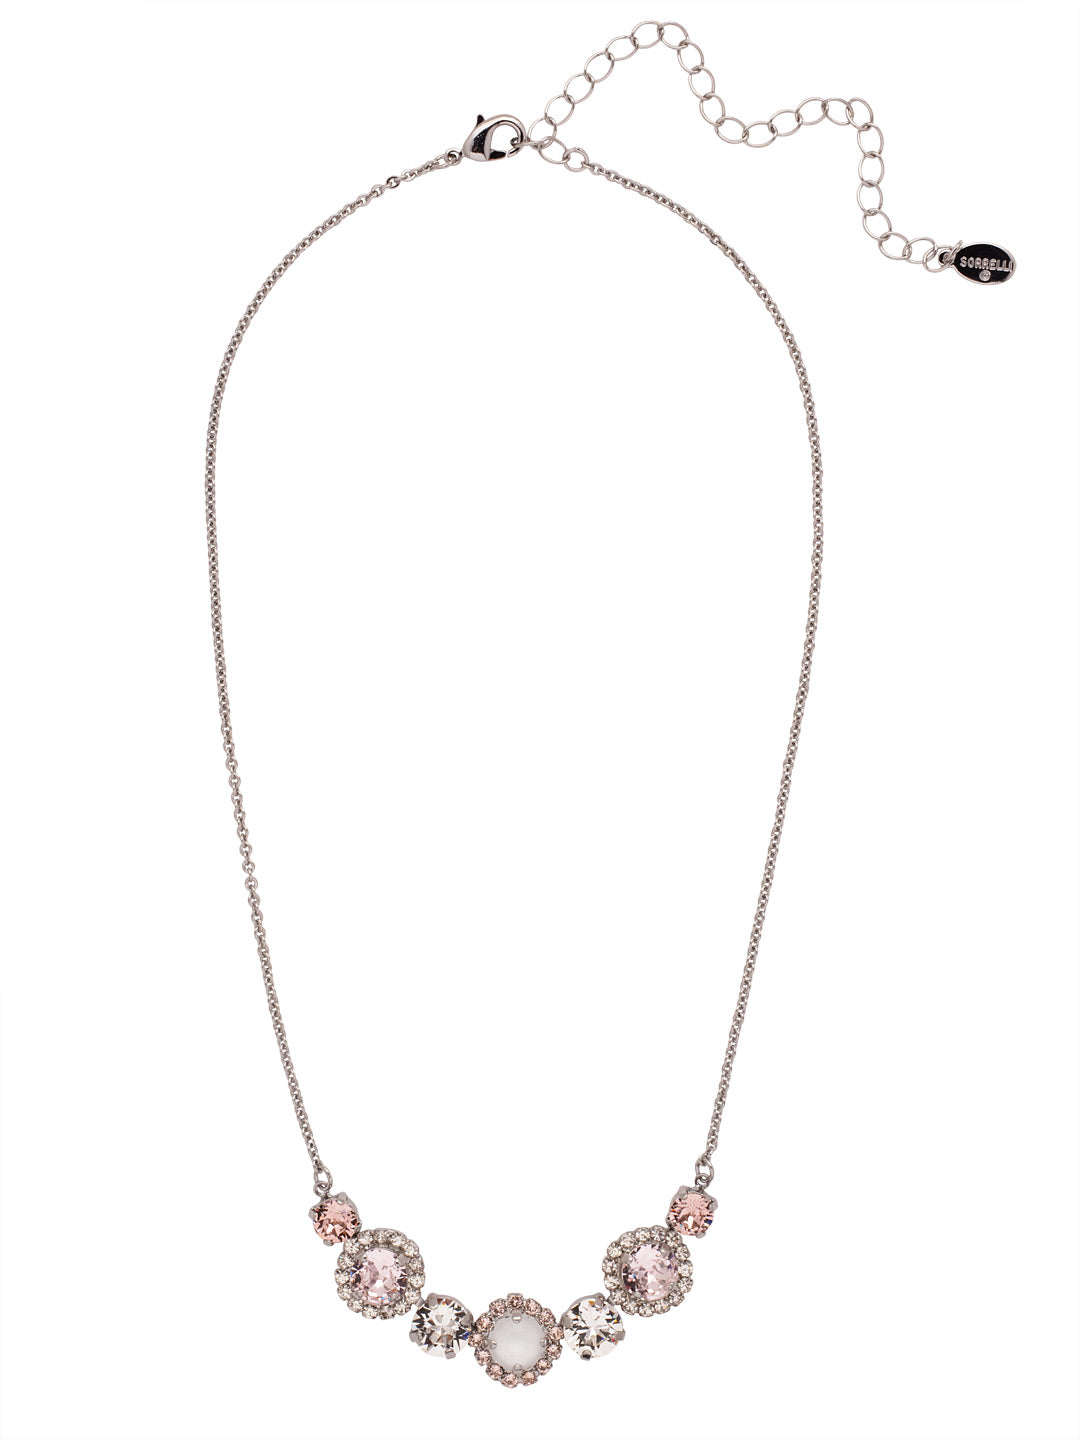 Buy Pink Morganite and Moissanite Necklace 18 Inches in Vermeil Rose Gold  Over Sterling Silver 1.85 ctw at ShopLC.